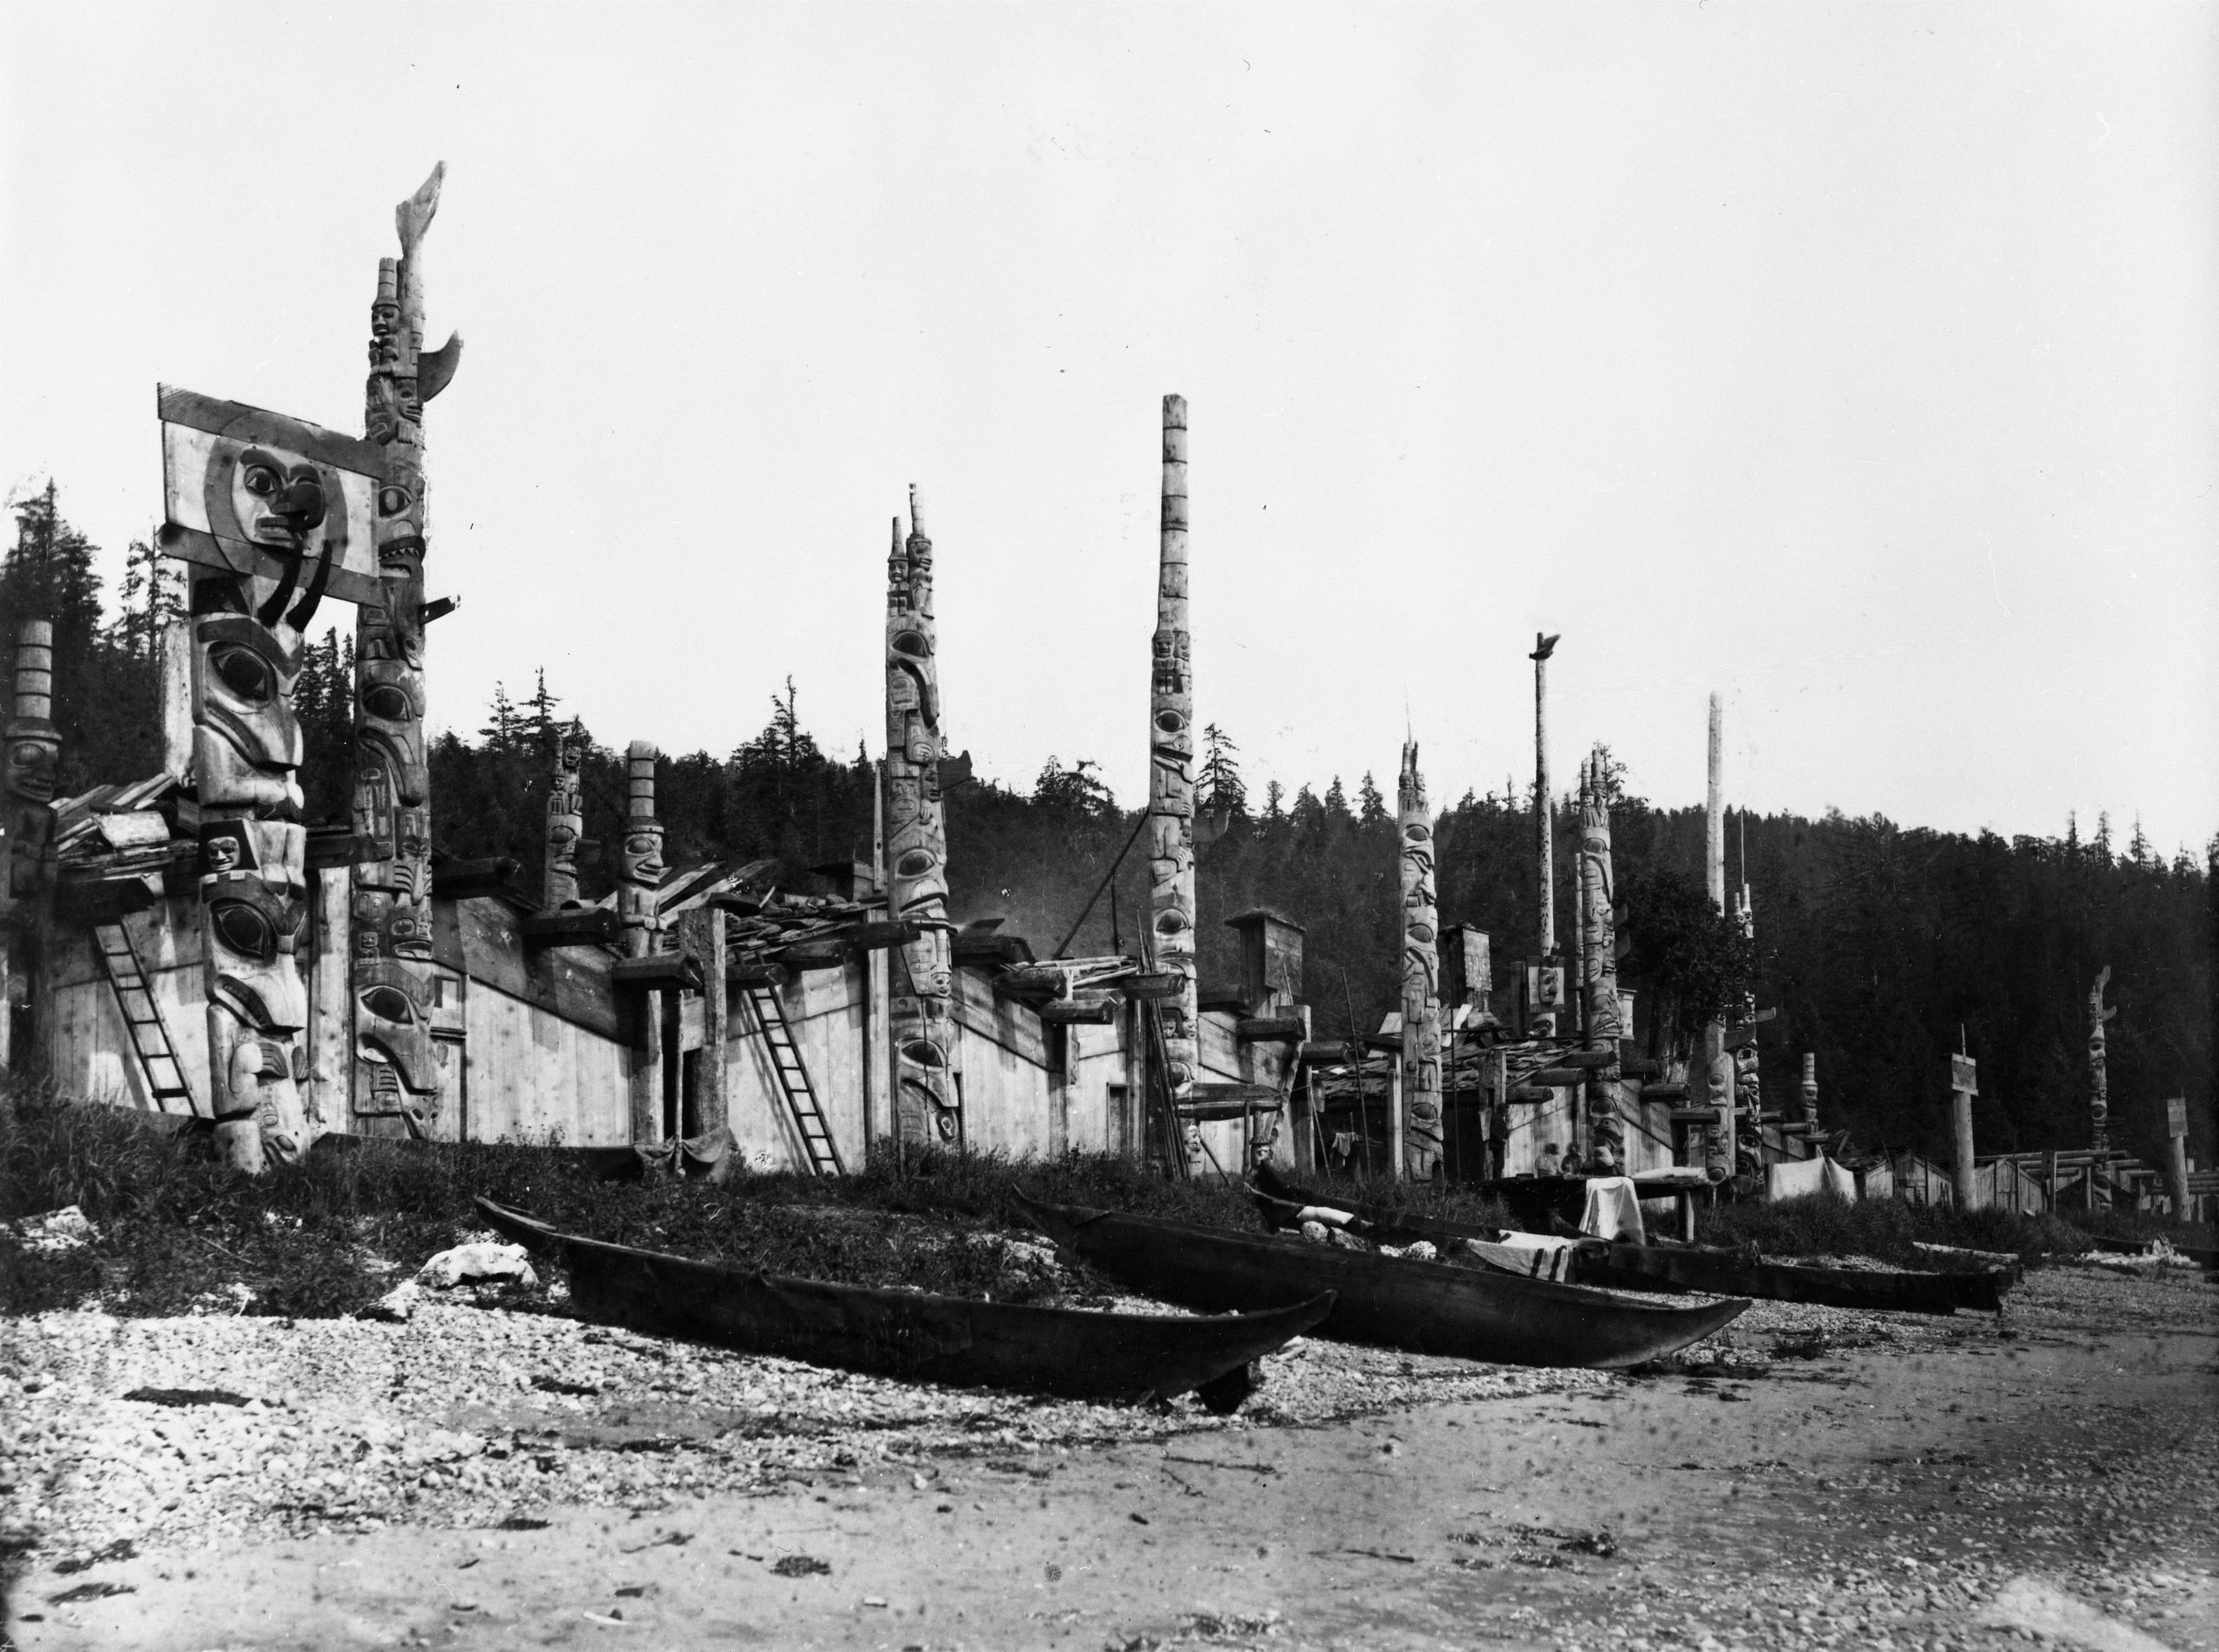 The Haida village of Skidegate in 1878, showing monumental poles, clan houses, and canoes on the beach. Photo by George M. Dawson.